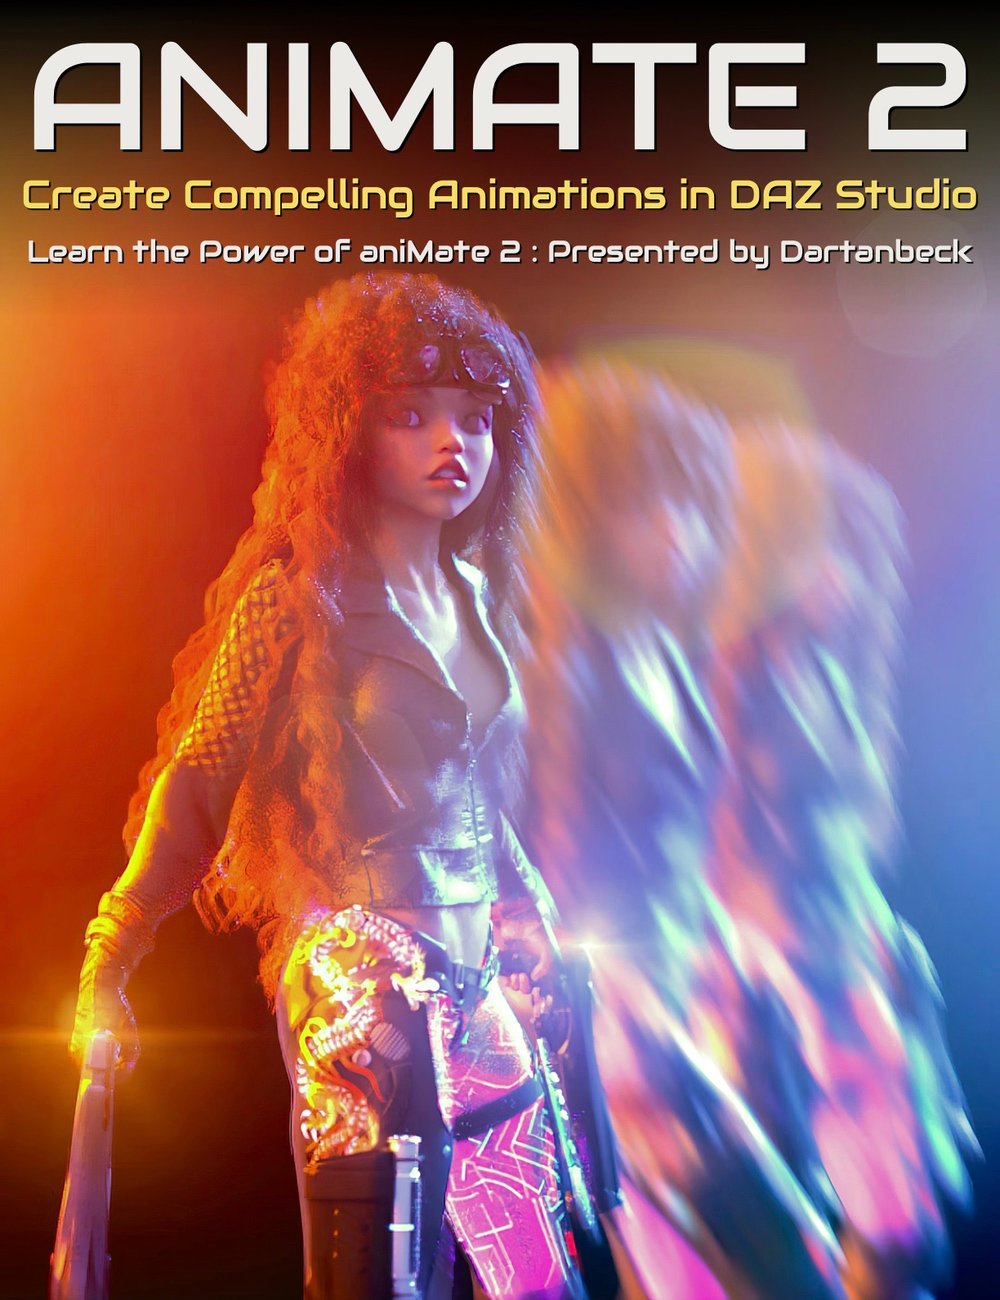 The Power of AniMate 2 : Animating with Precision in DAZ Studio by: Digital Art LiveDartanbeck, 3D Models by Daz 3D